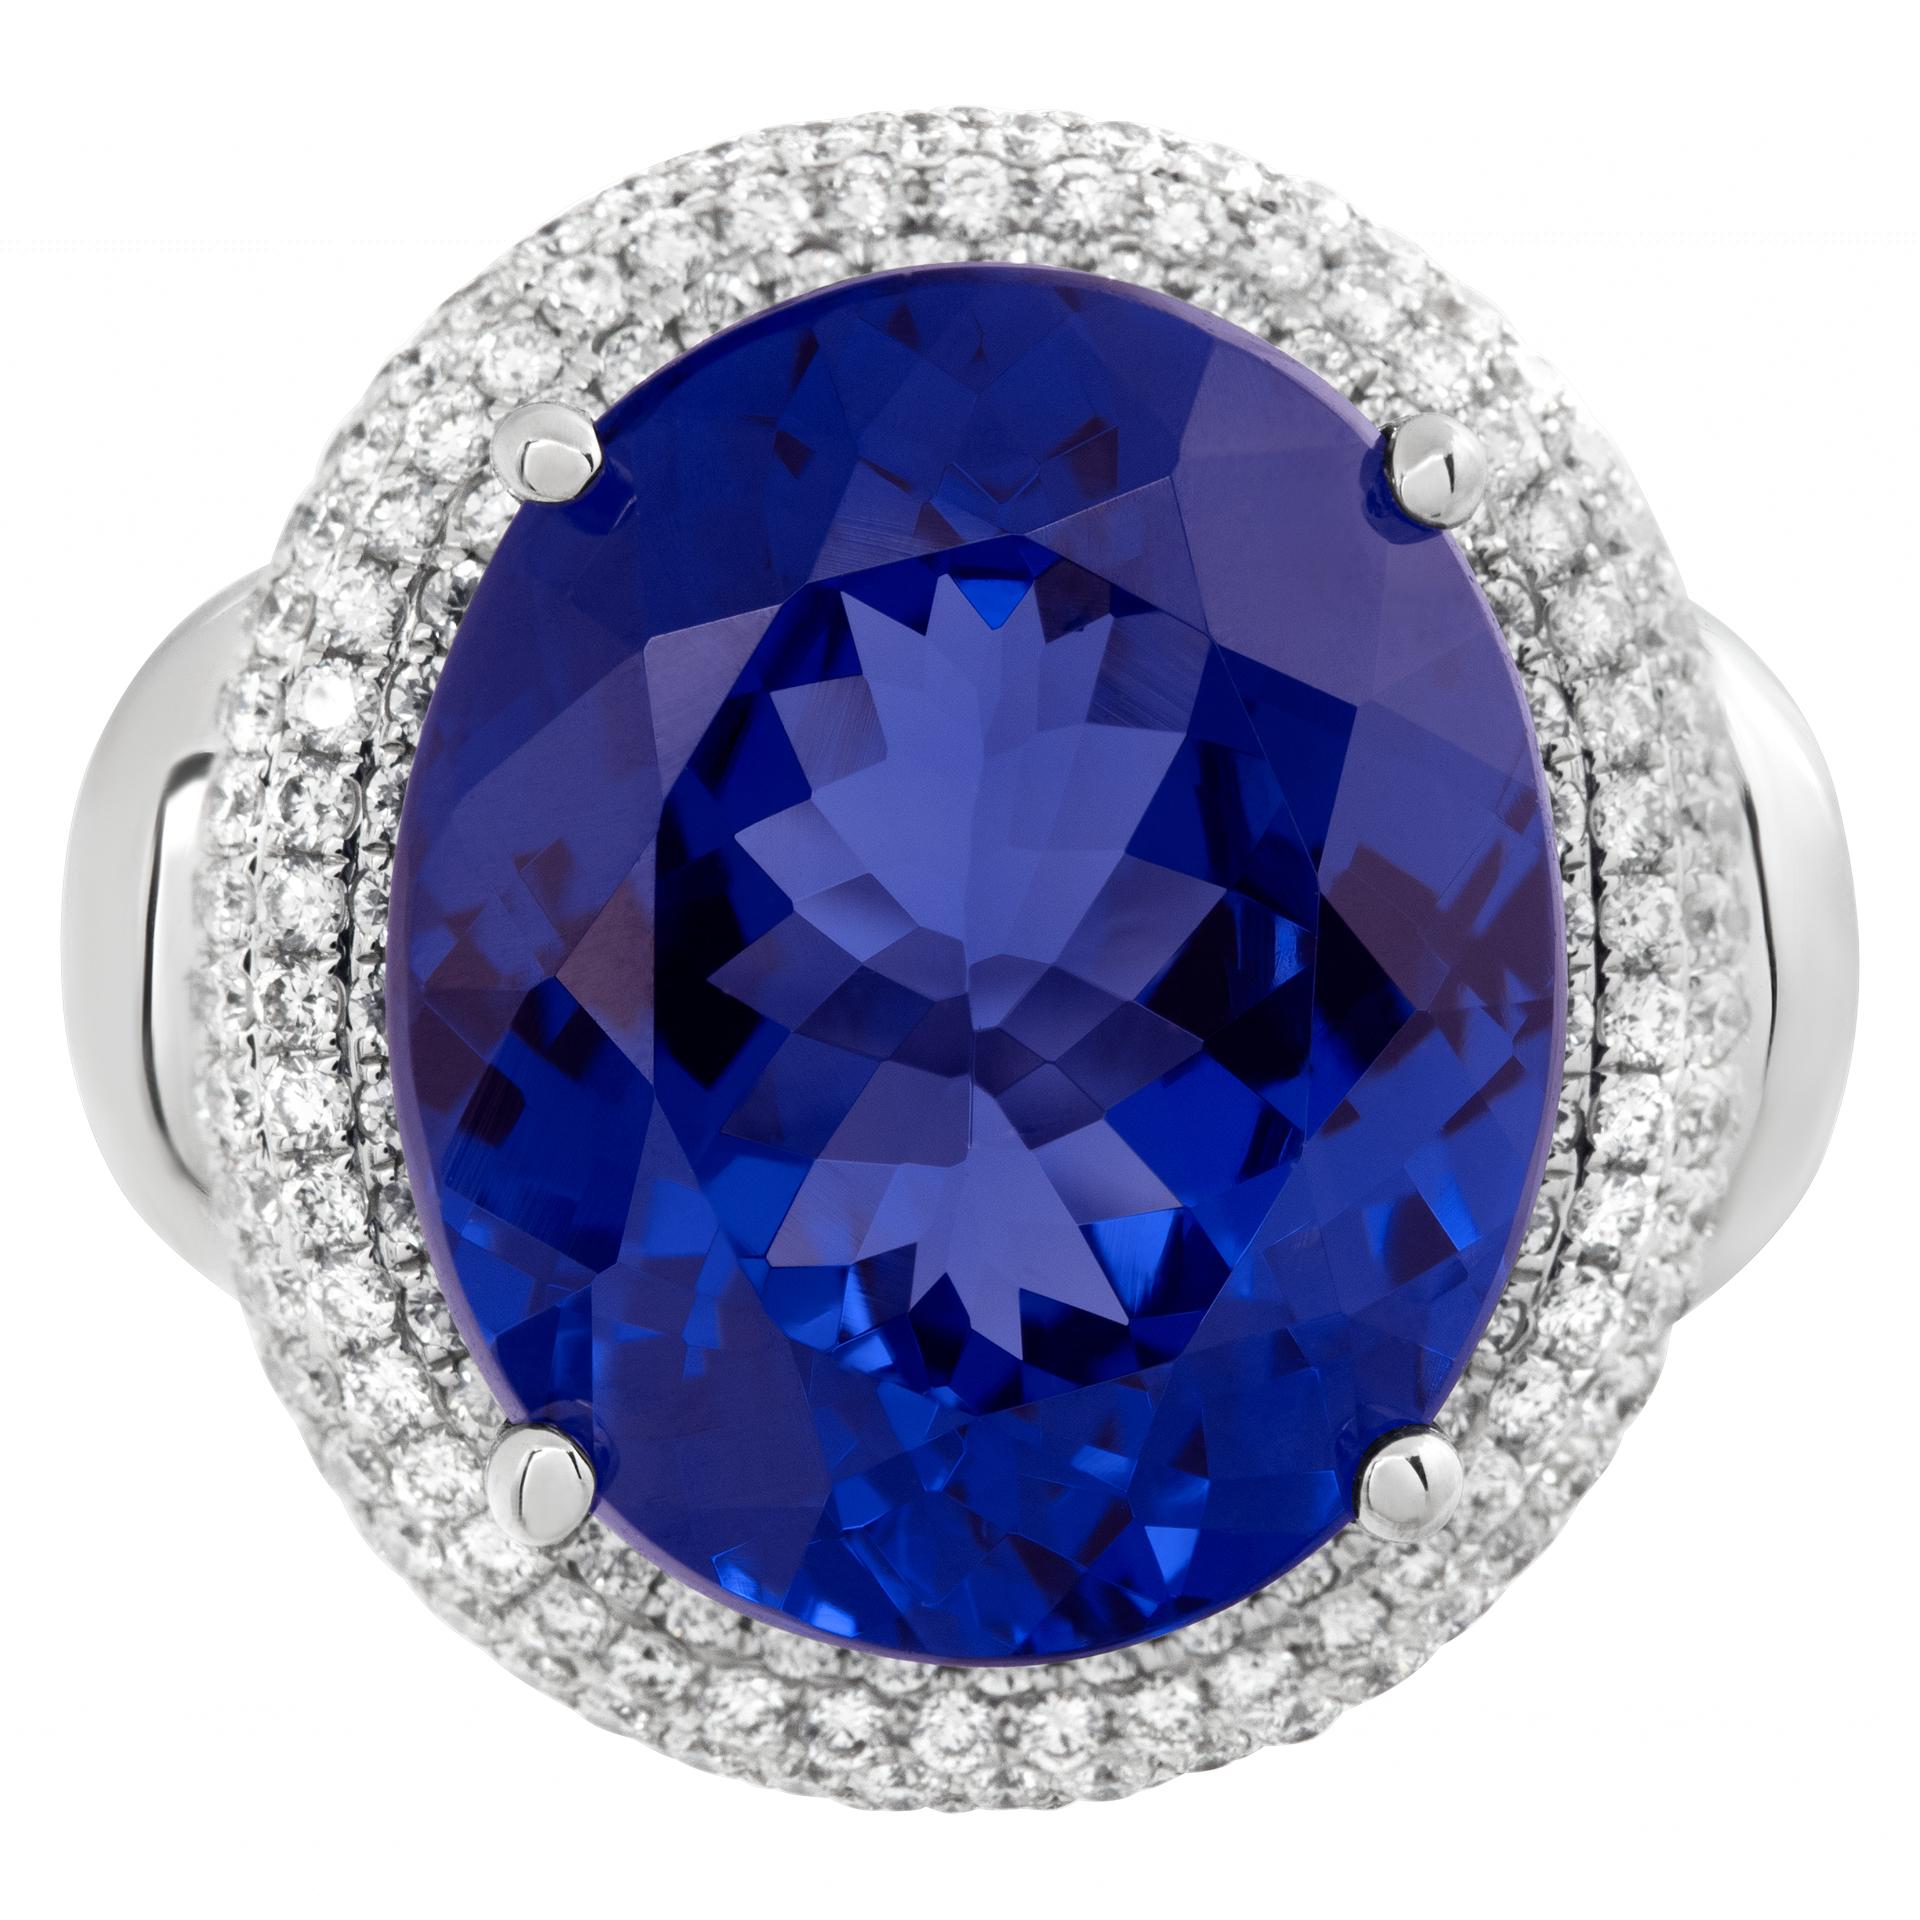 AGL certified Tanzanite and diamond ring in 18k white gold. Brilliant oval cut Tanzanite total approx. weight: 12.80 carats. Round brilliant cut diamonds total approx. weight: 0.99 carat, estimate: H-I color, SI clarity. 20 x 20mm. Ring size 6.This